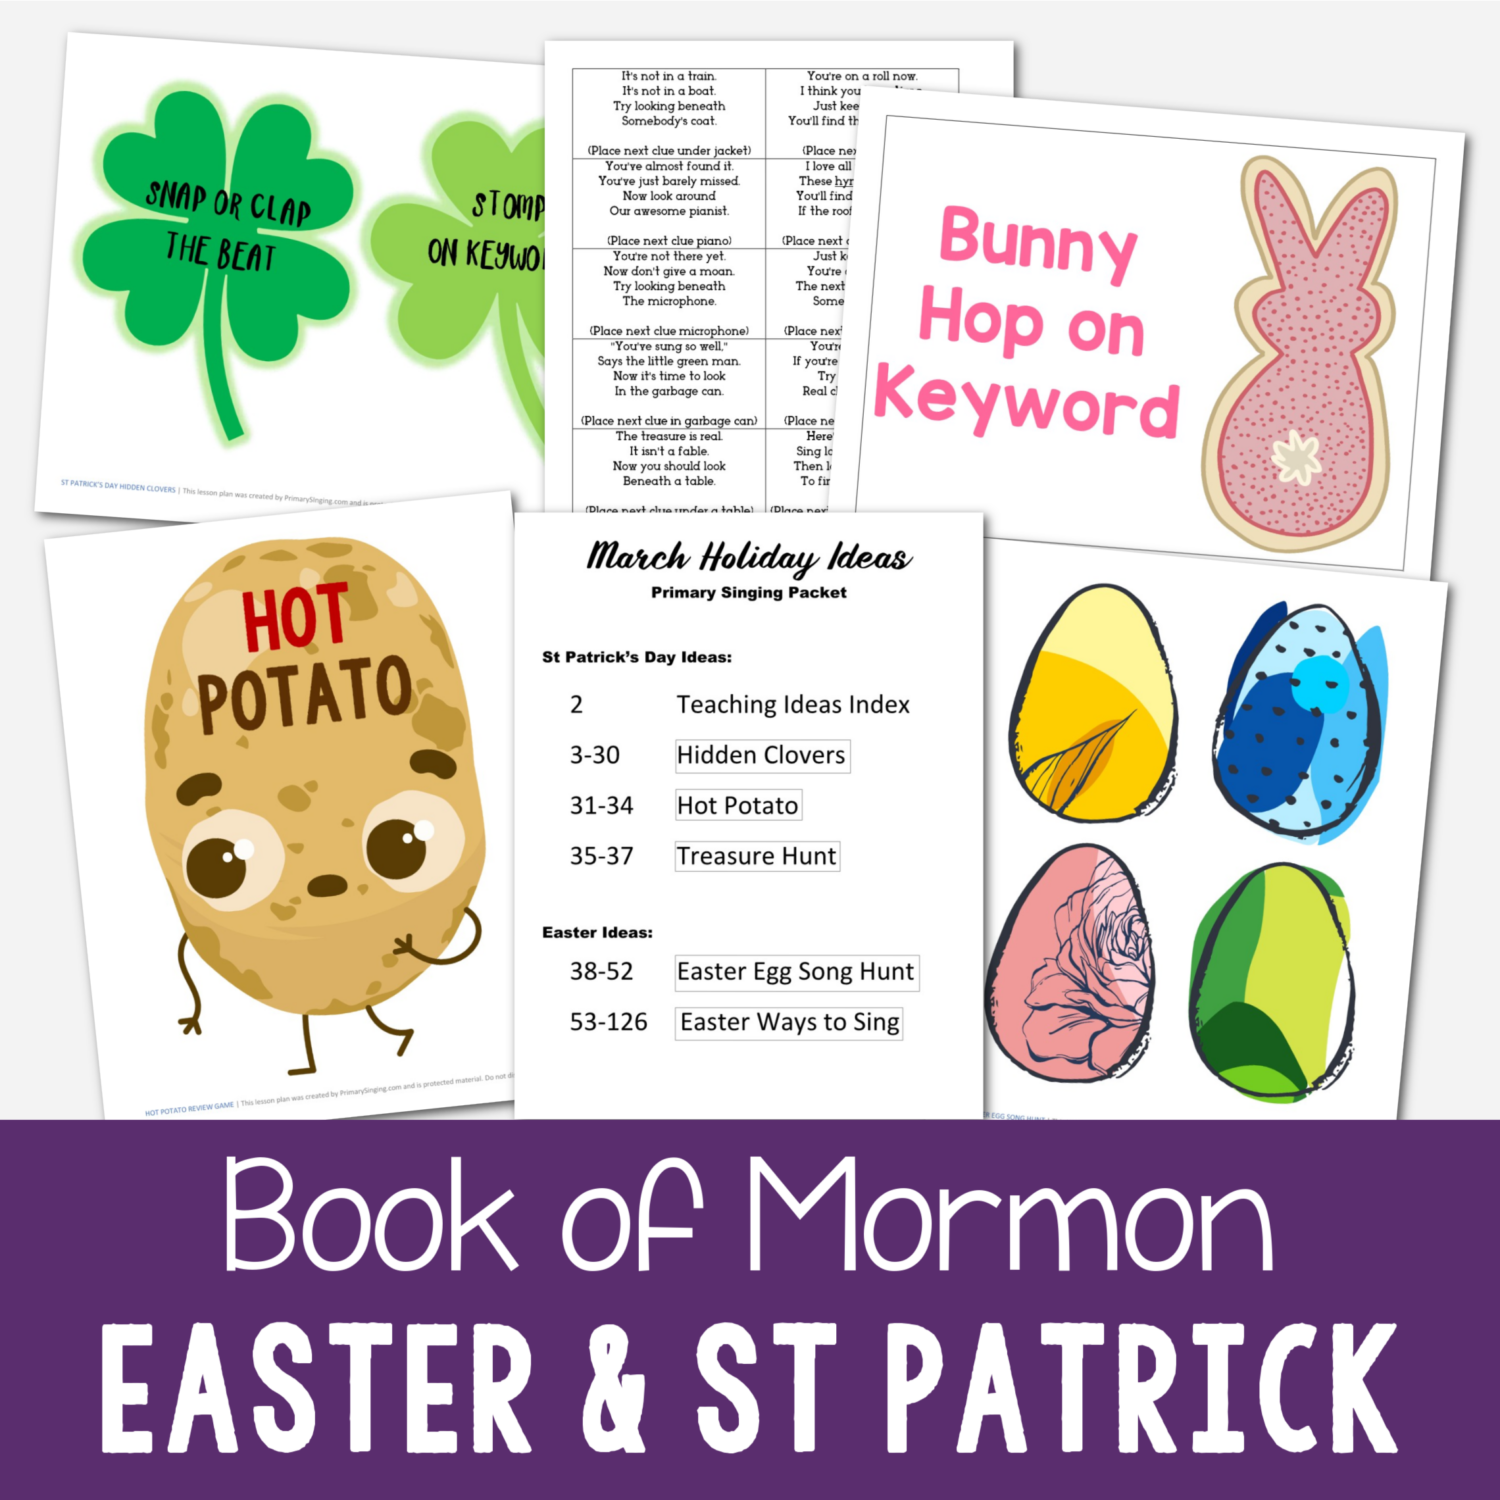 Book of Mormon March Easter & St Patrick's Day Ideas